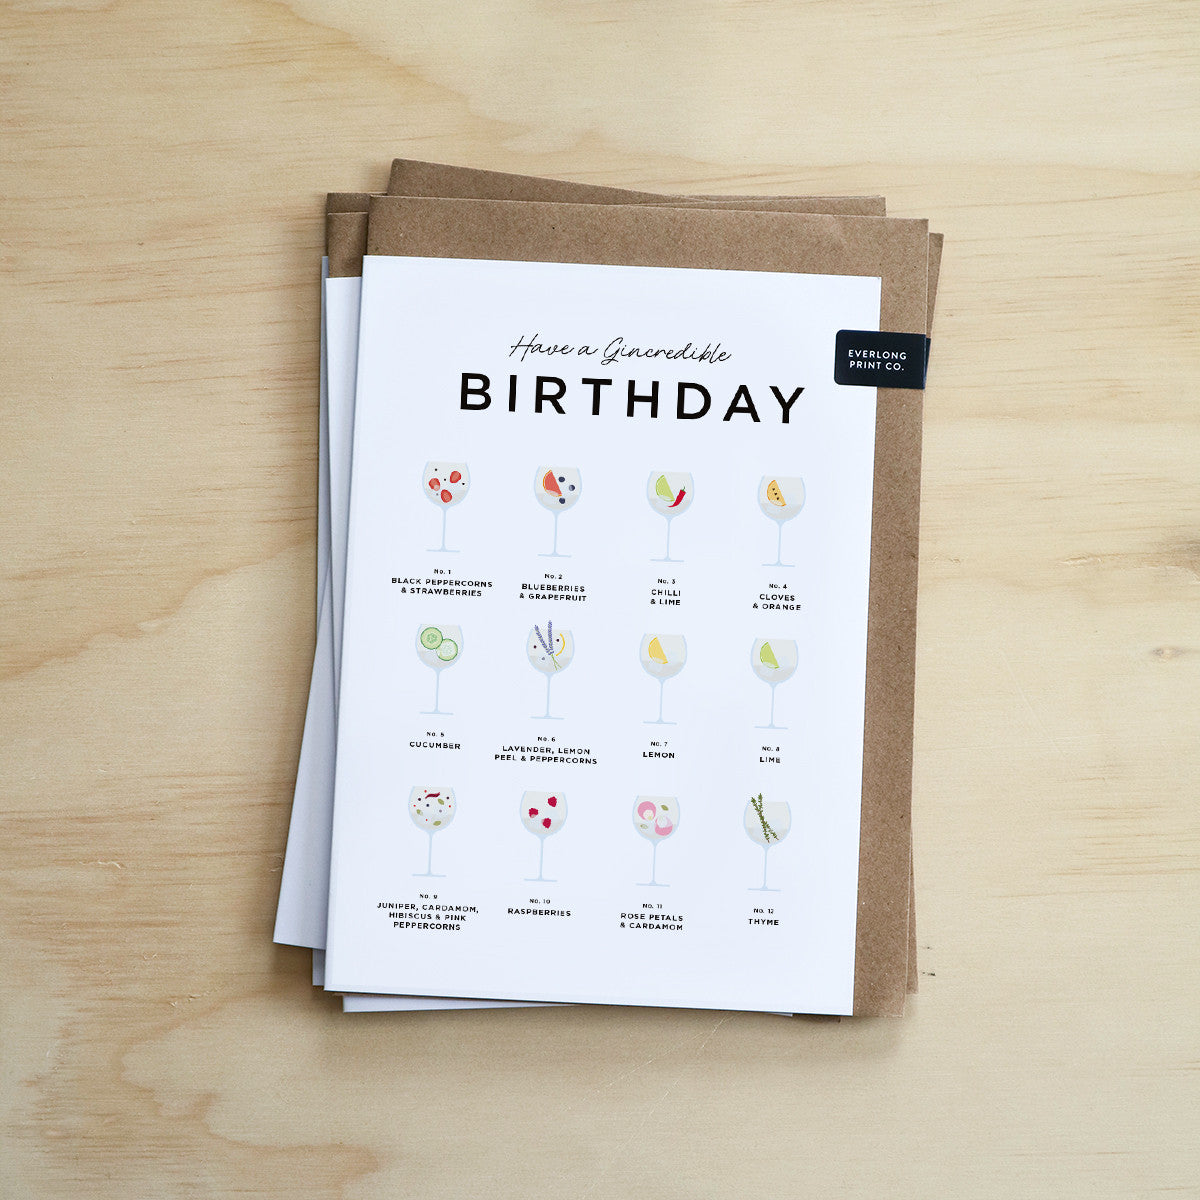 Have a Gincredible Birthday Card from Everlong Print Co. Made in England